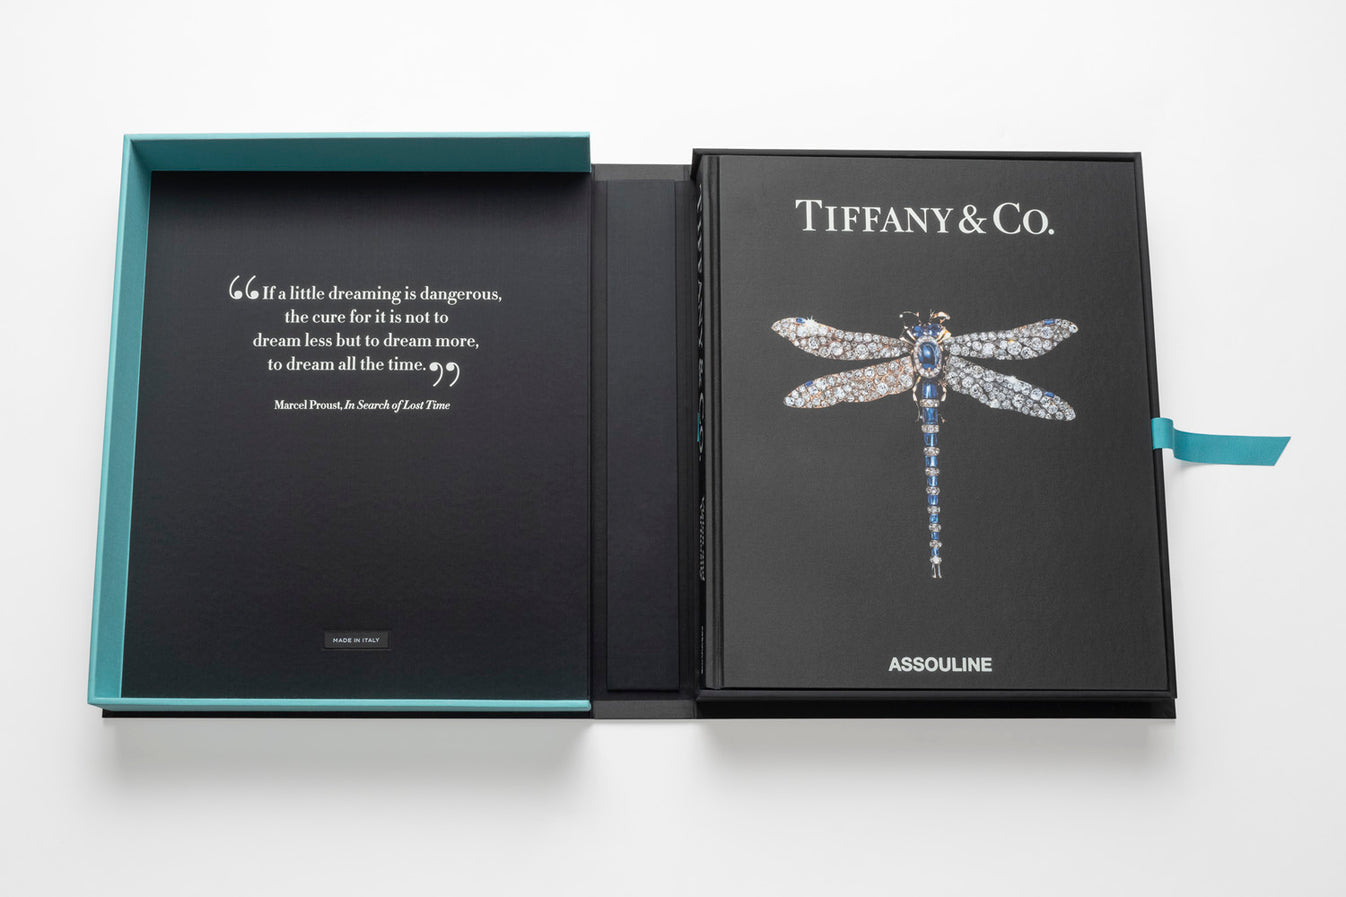 TIFFANY & CO. VISION AND VIRTUOSITY (ULTIMATE EDITION)